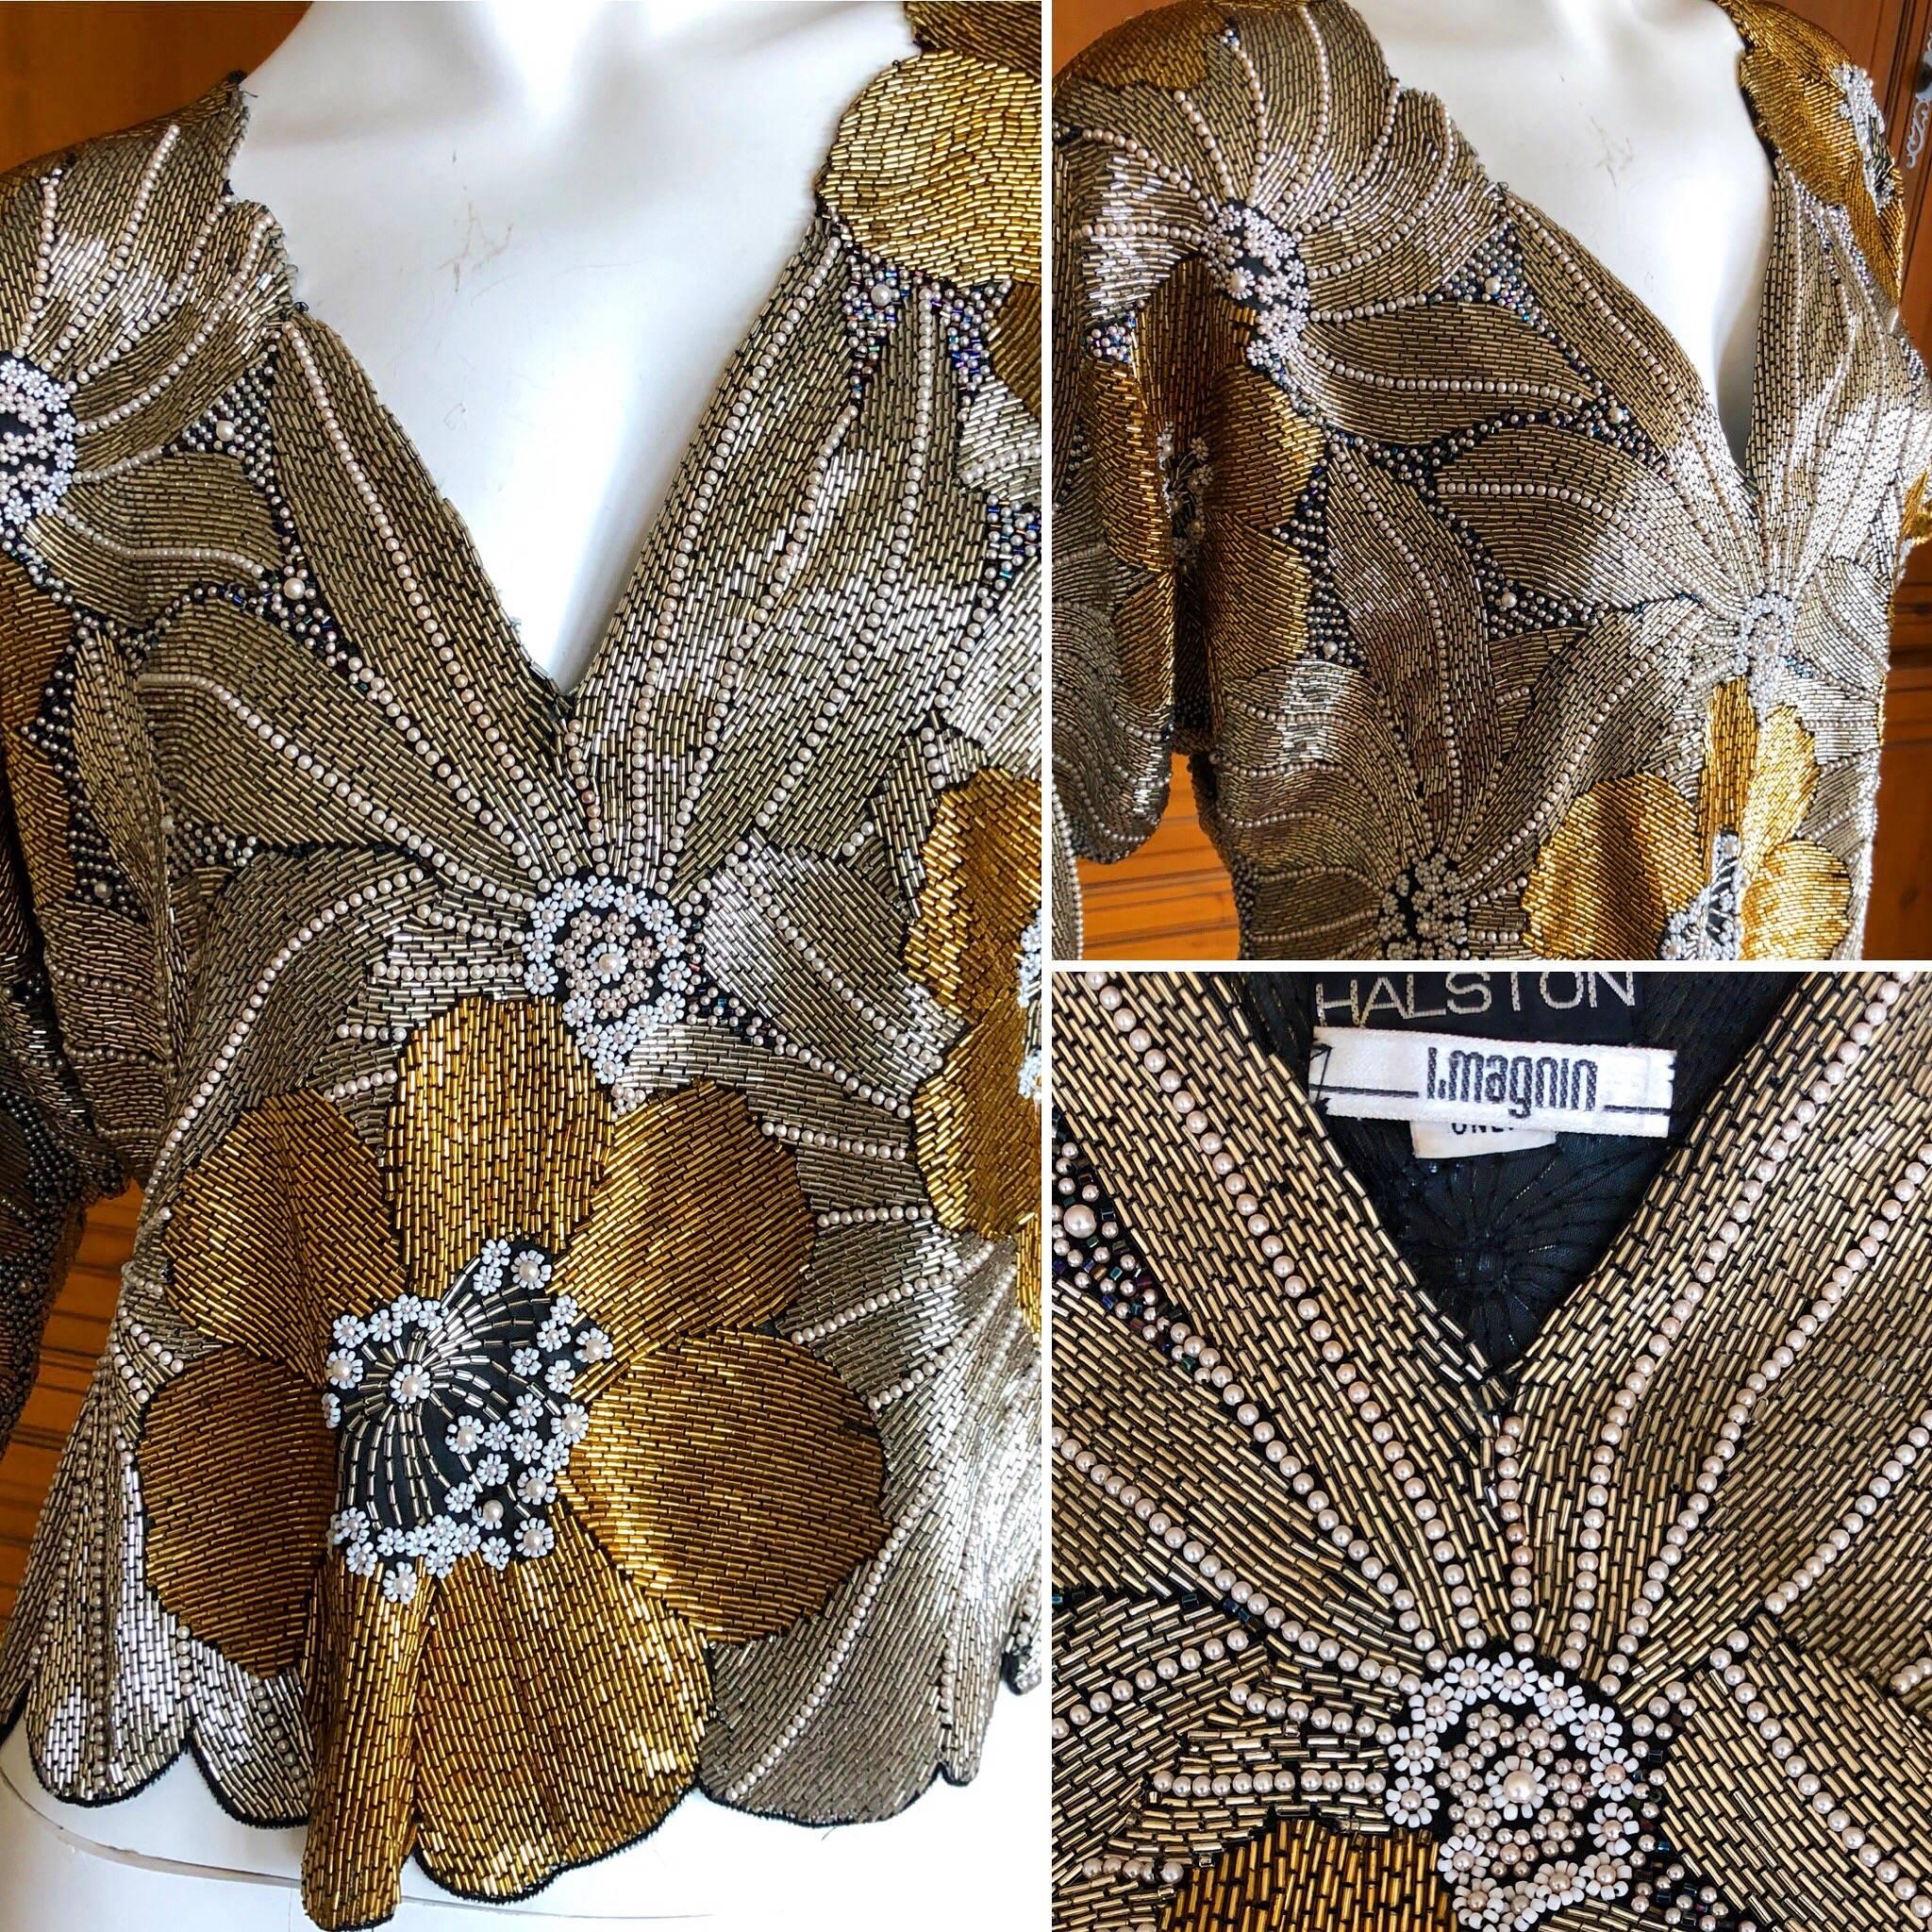 Halston 1970's Disco Era Gold Bugle Bead and Pearl Embellished Top For Sale 9